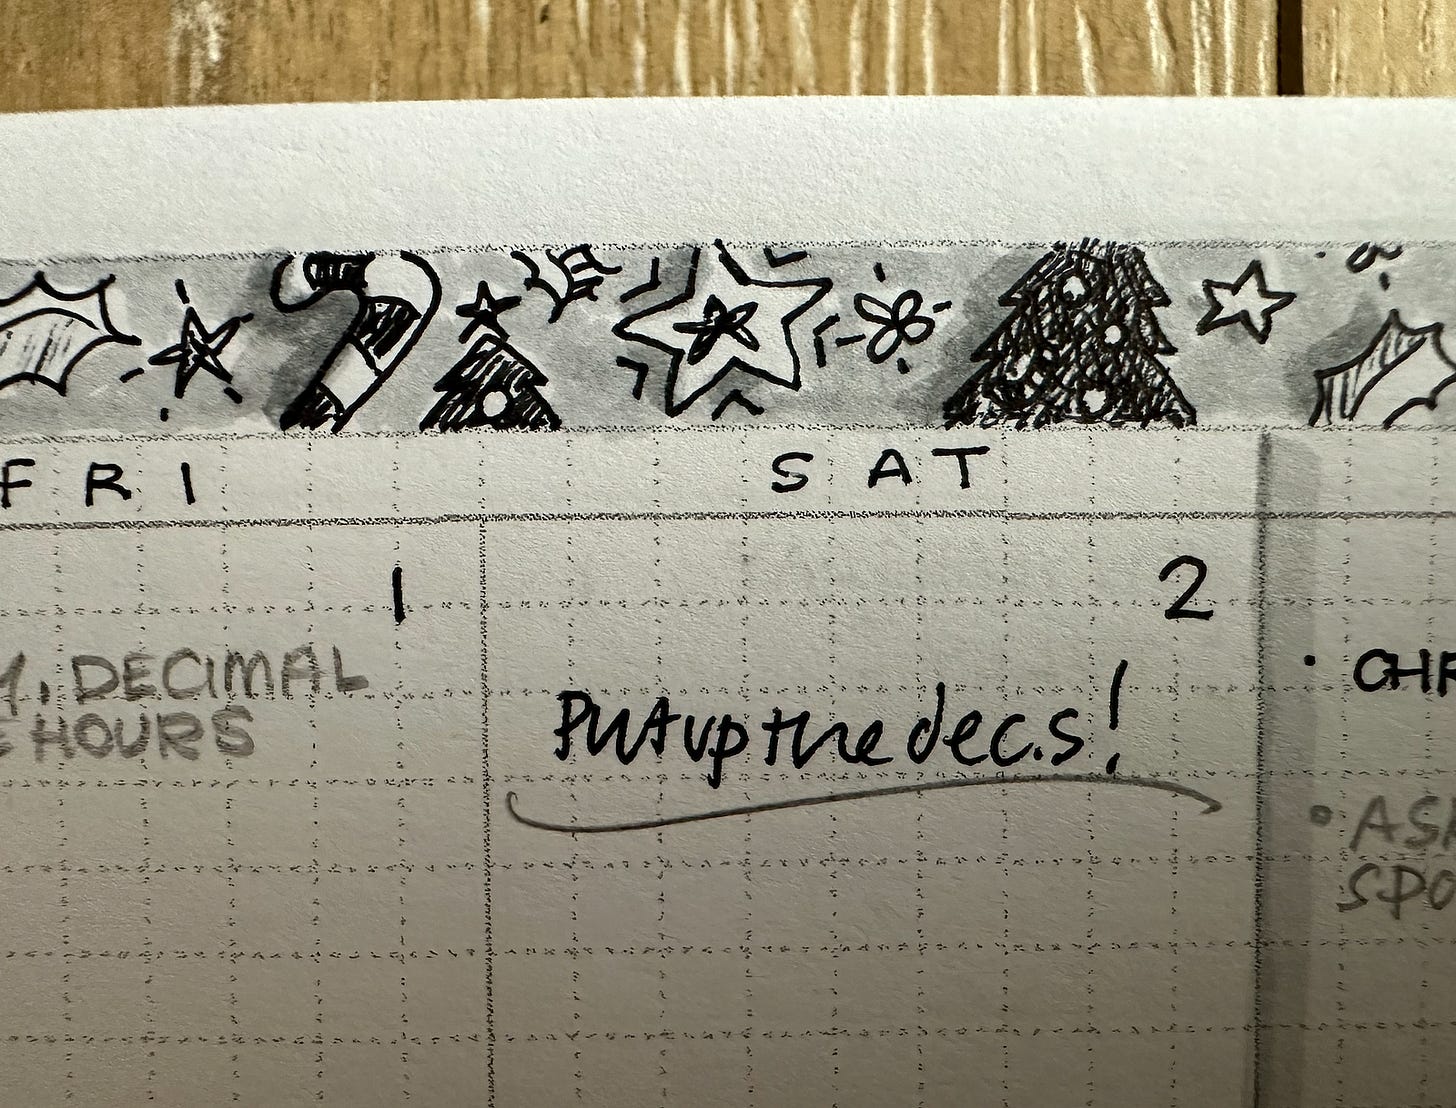 Closeup of a monthly calendar page, showing part of Friday and Saturday. There are rough black and grey drawings of various Christmas decorations in a banner across the top, including holly, a candy cane, stars, and a Christmas tree.